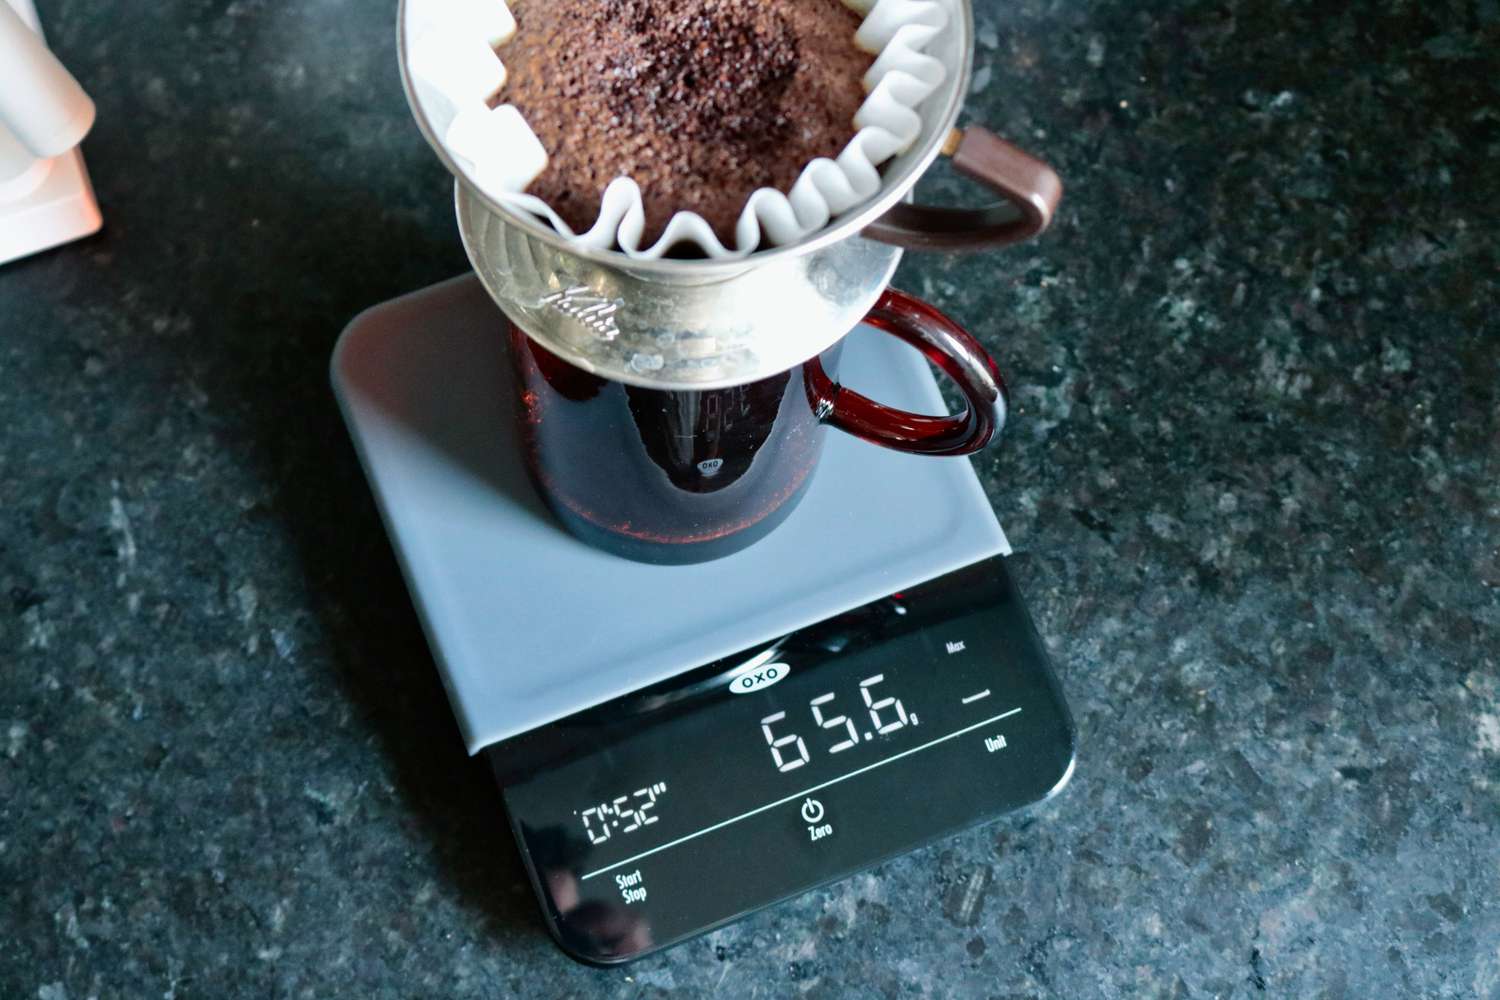 brewing coffee in a pourover brewer on the OXO scale